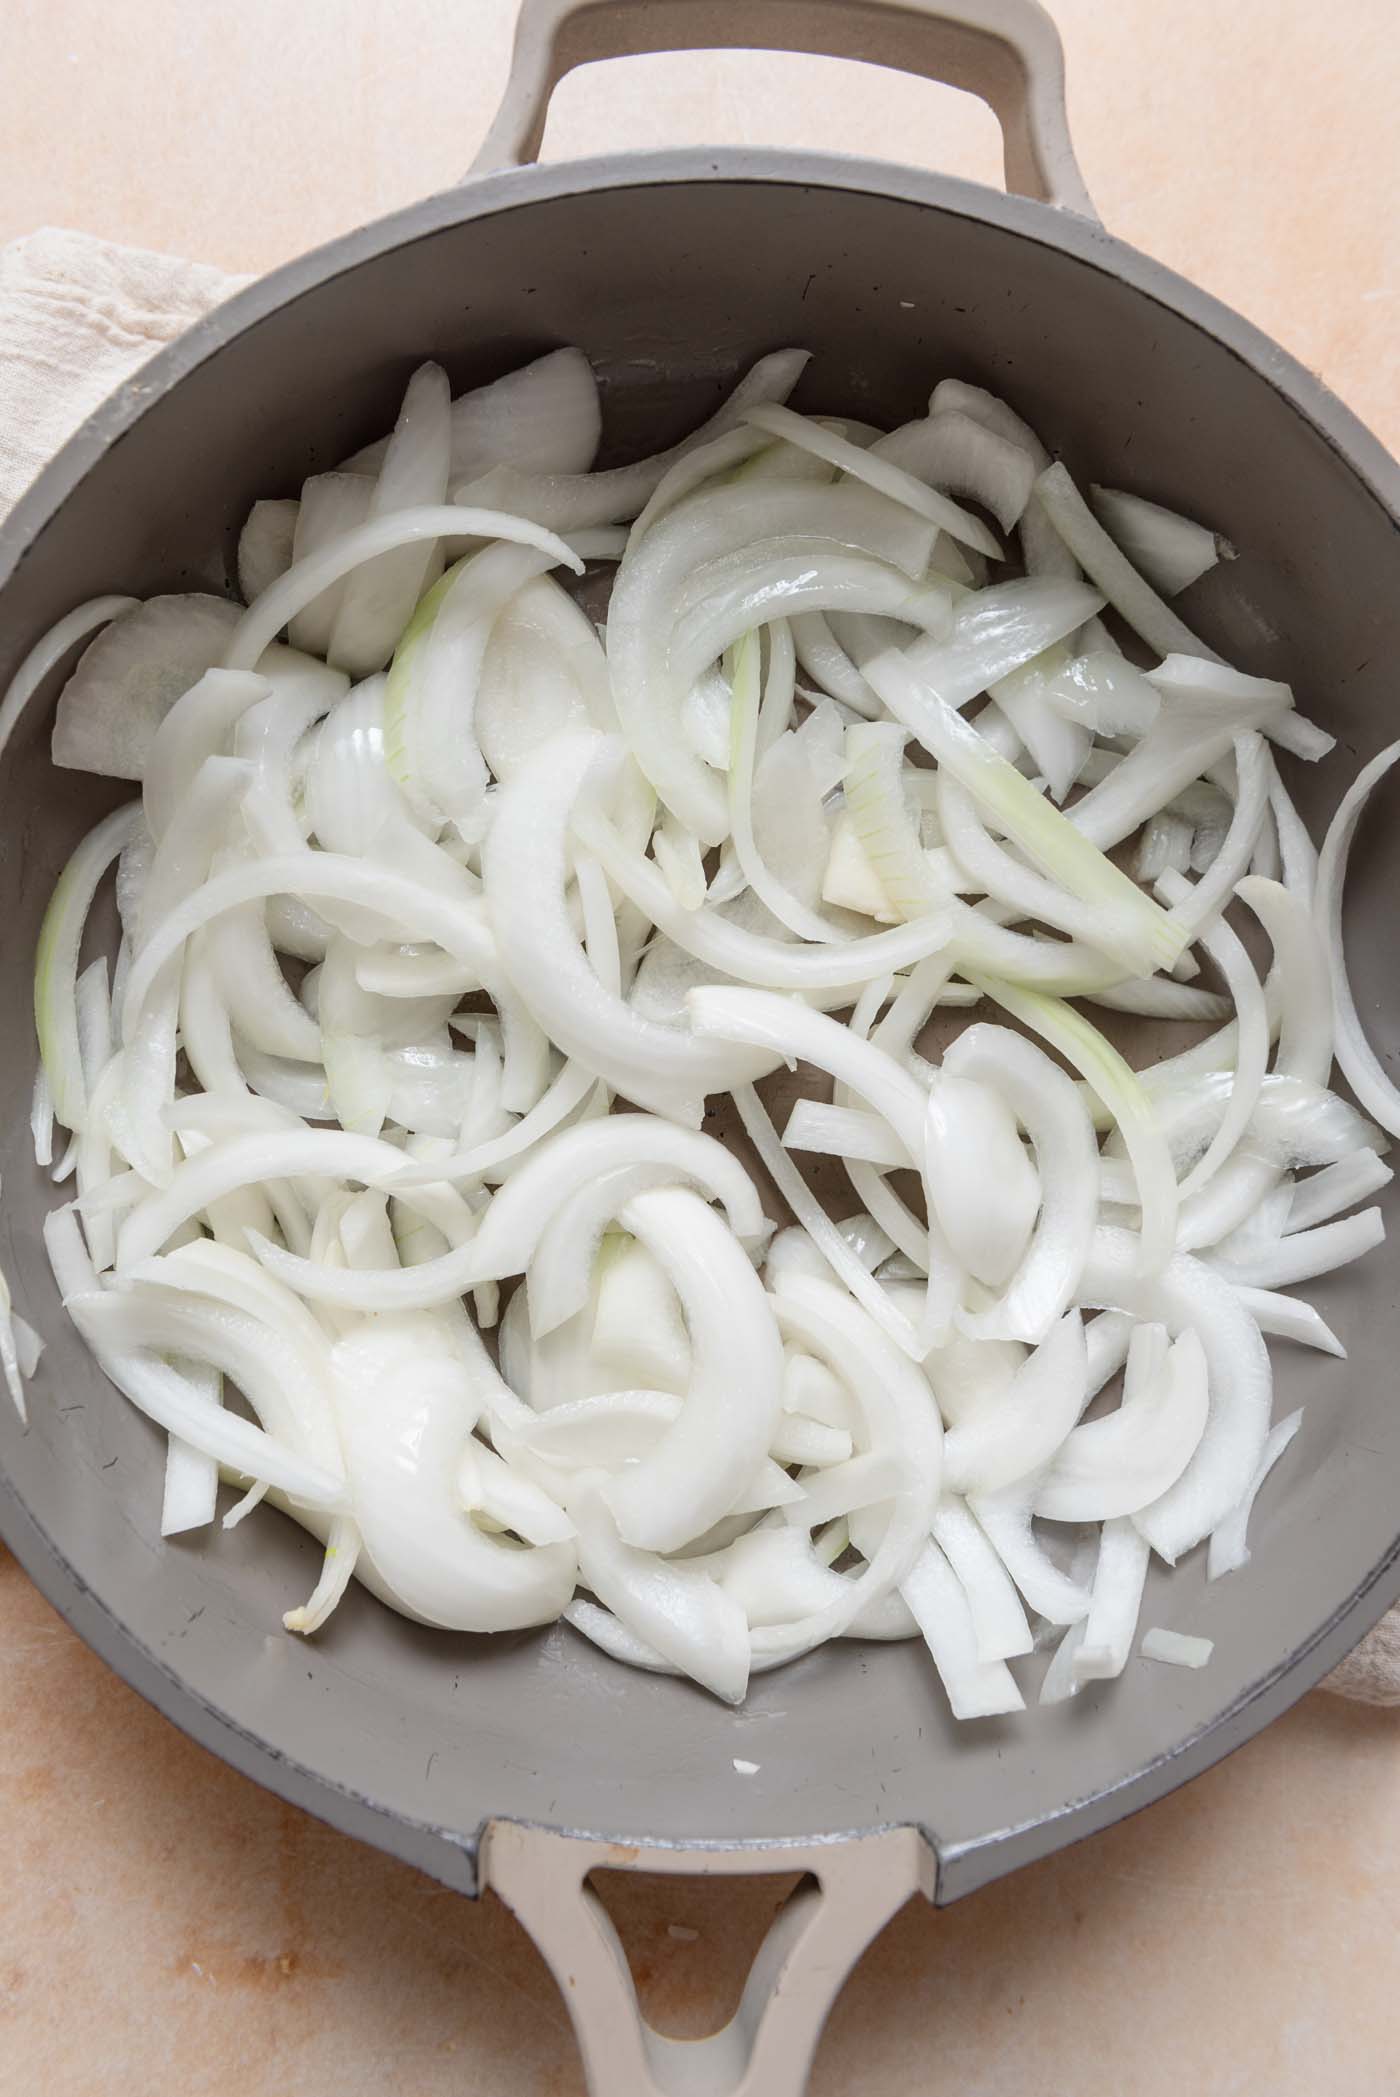 Sliced onions cooking in a pan.